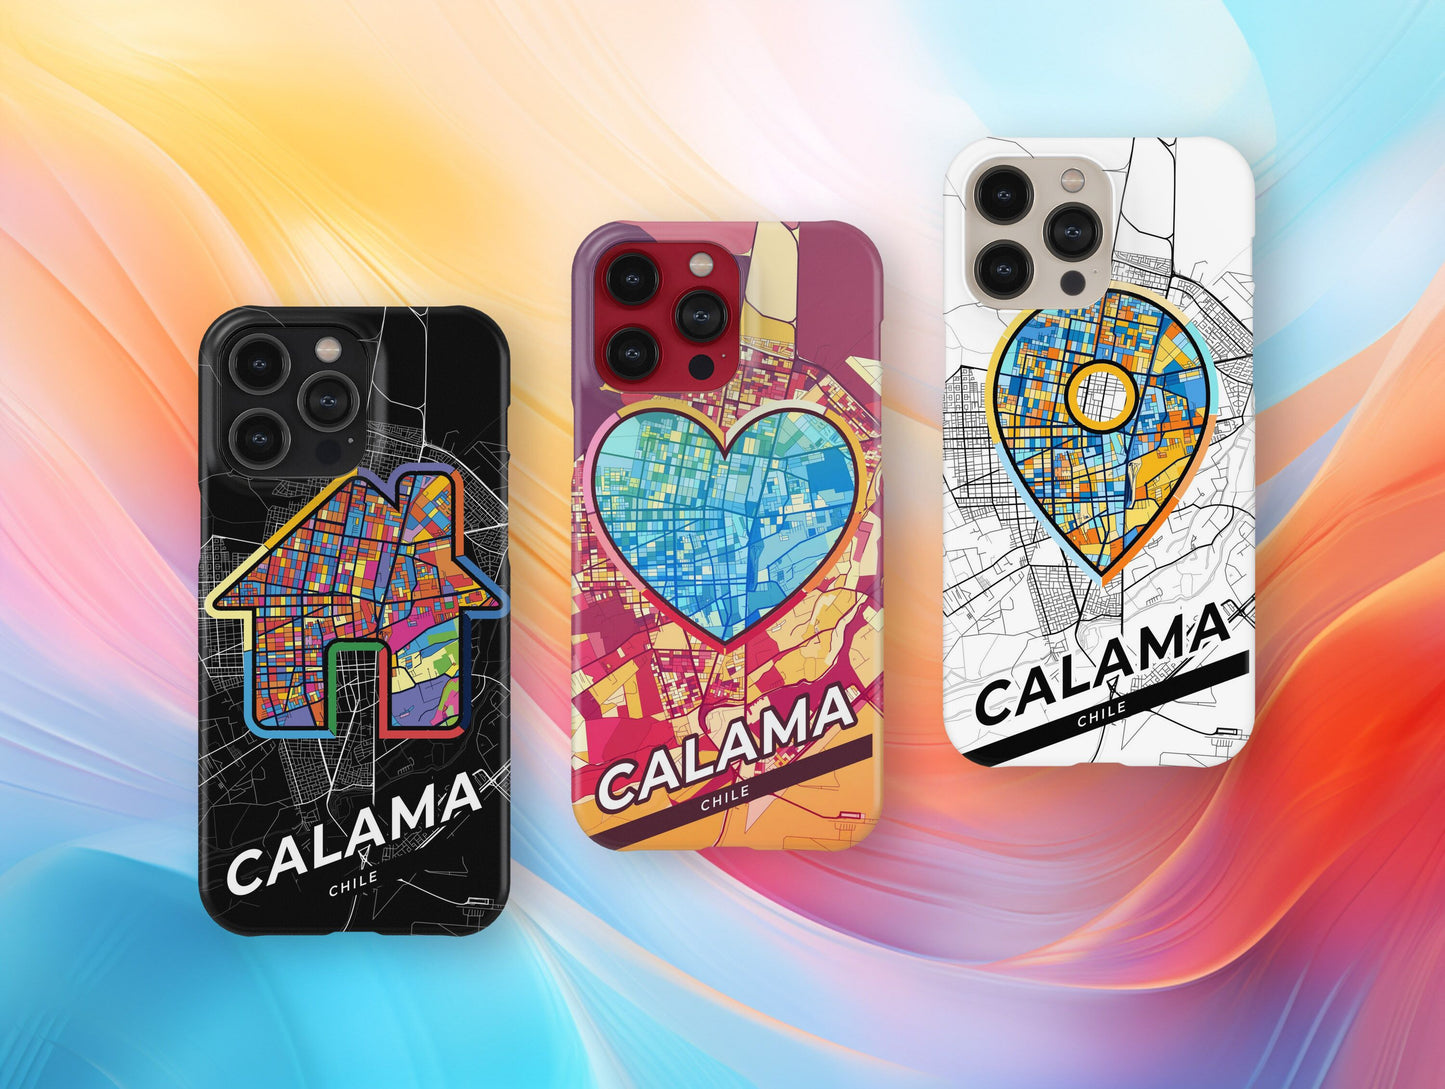 Calama Chile slim phone case with colorful icon. Birthday, wedding or housewarming gift. Couple match cases.